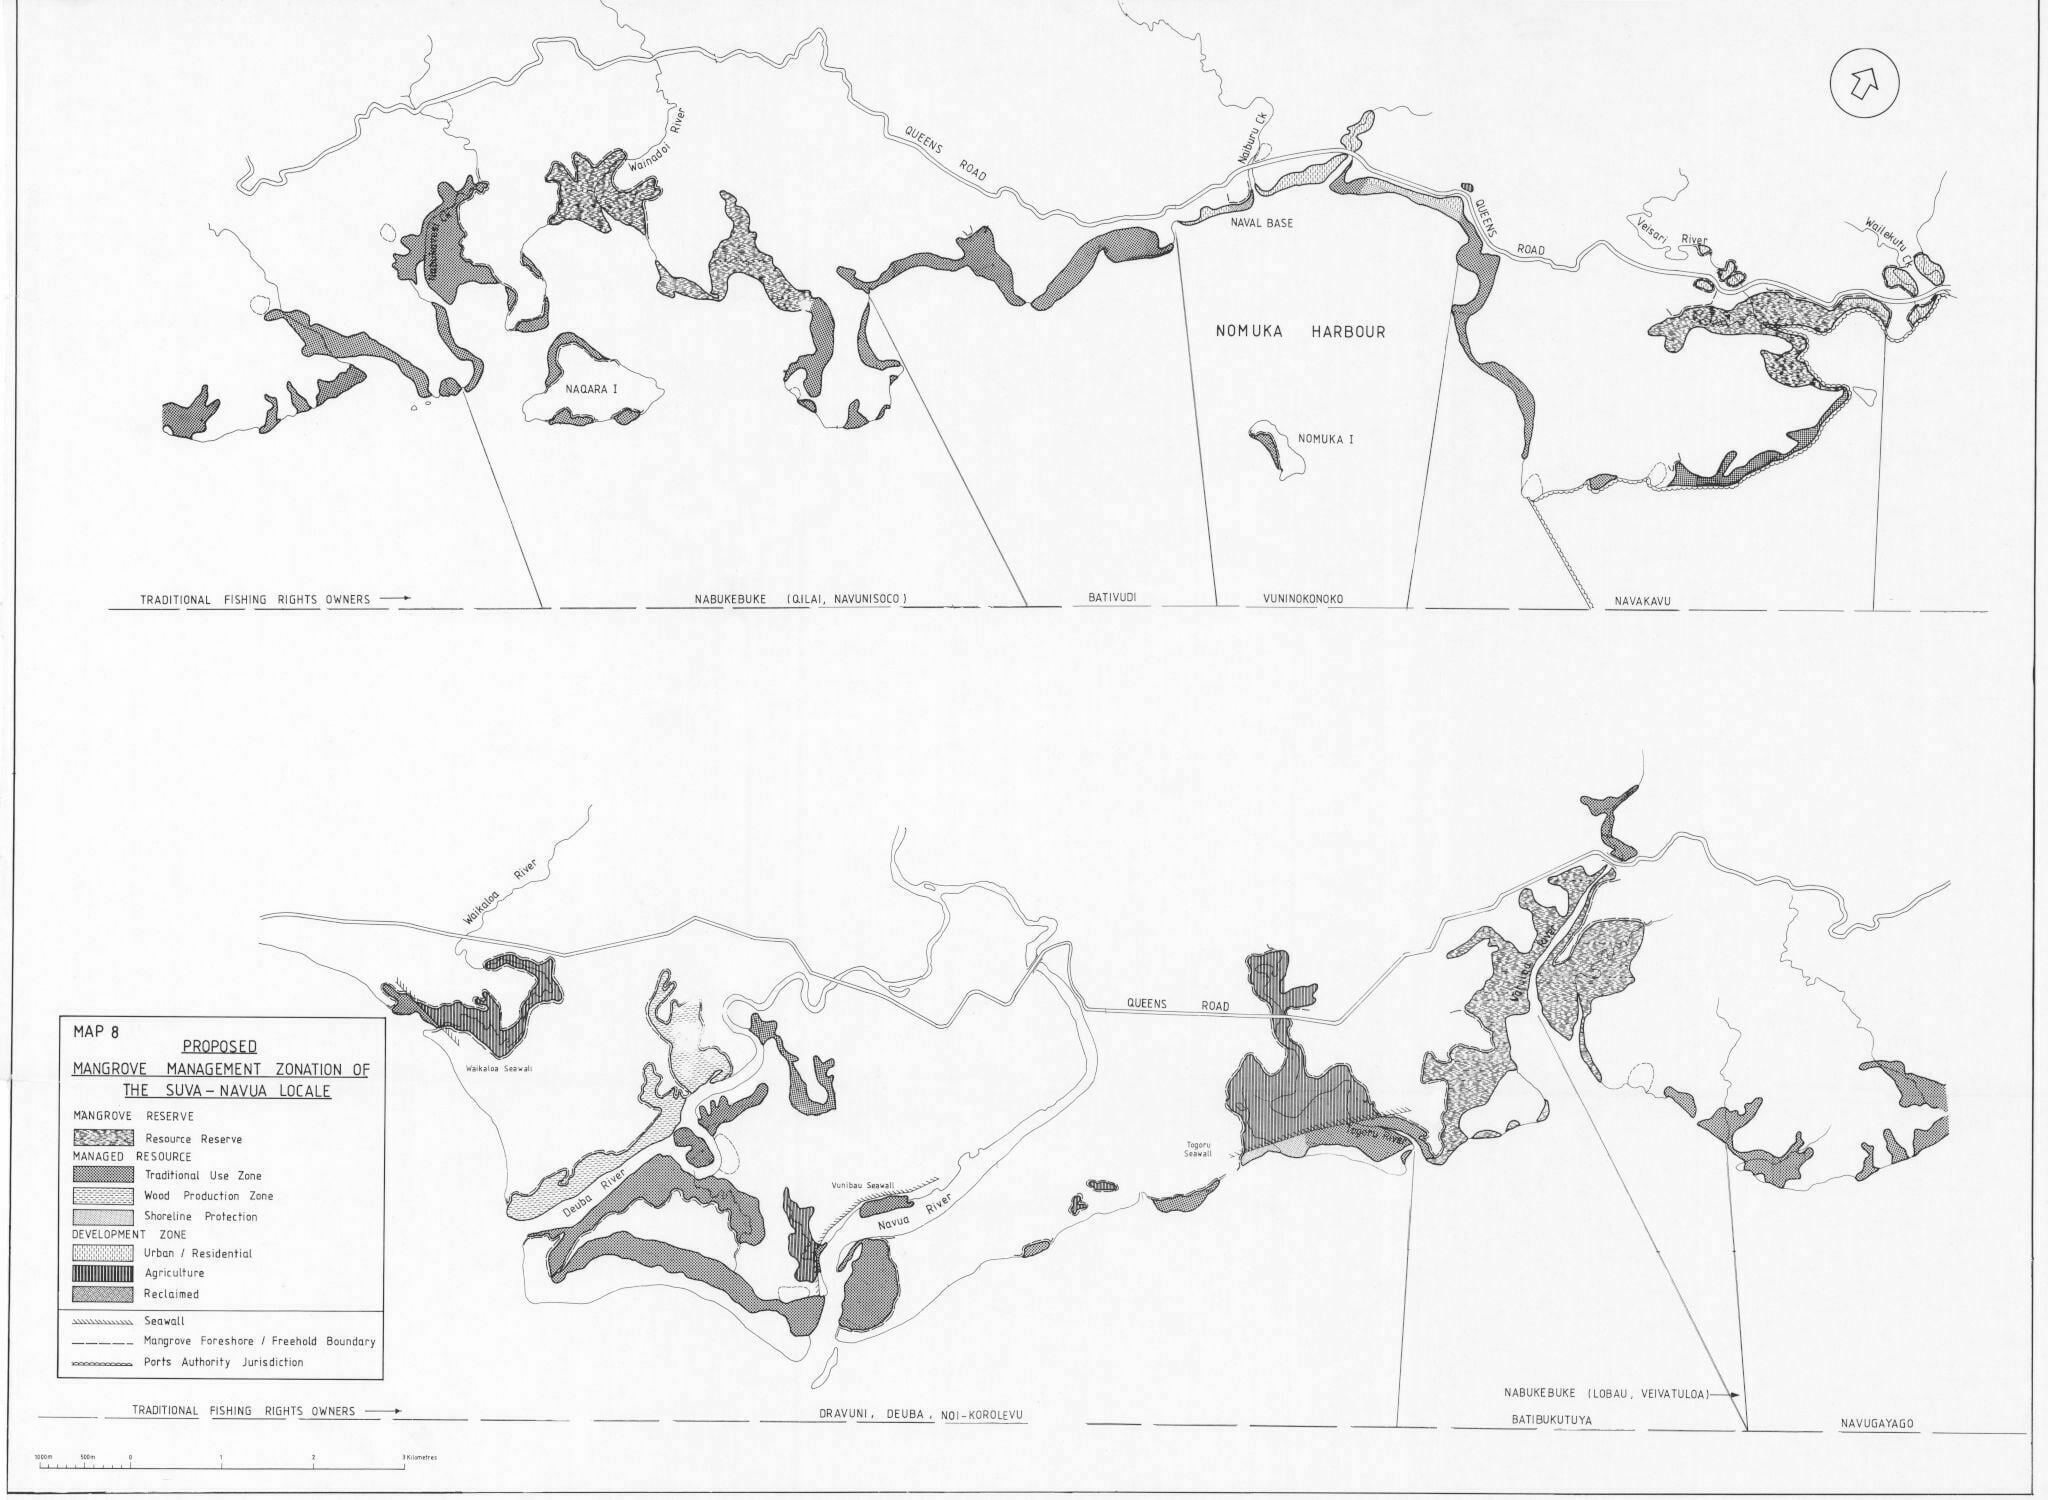 Map-8-Proposed-mangrove-management-zonation-of-the-Suva-Navua-Locale